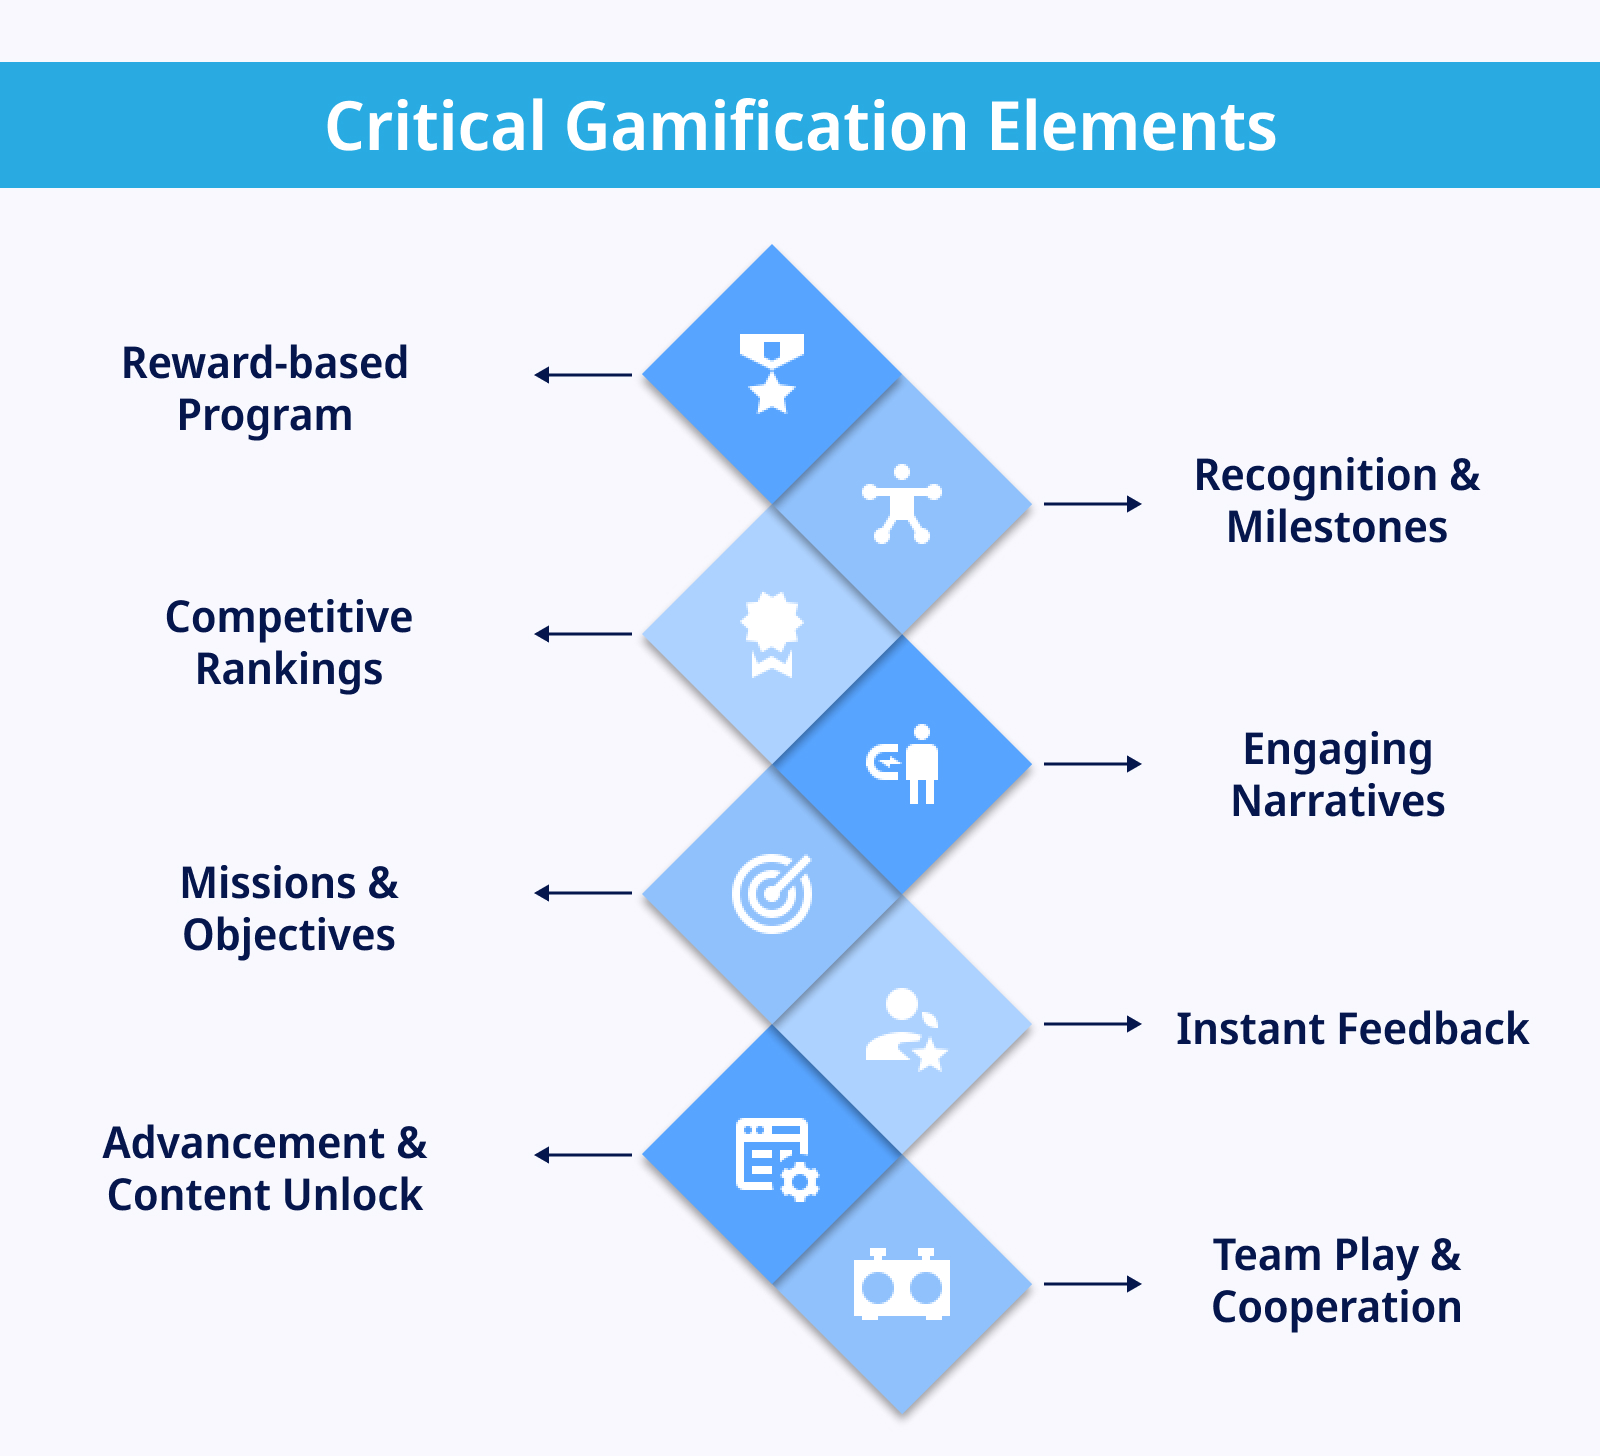 Critical Gamification Elements